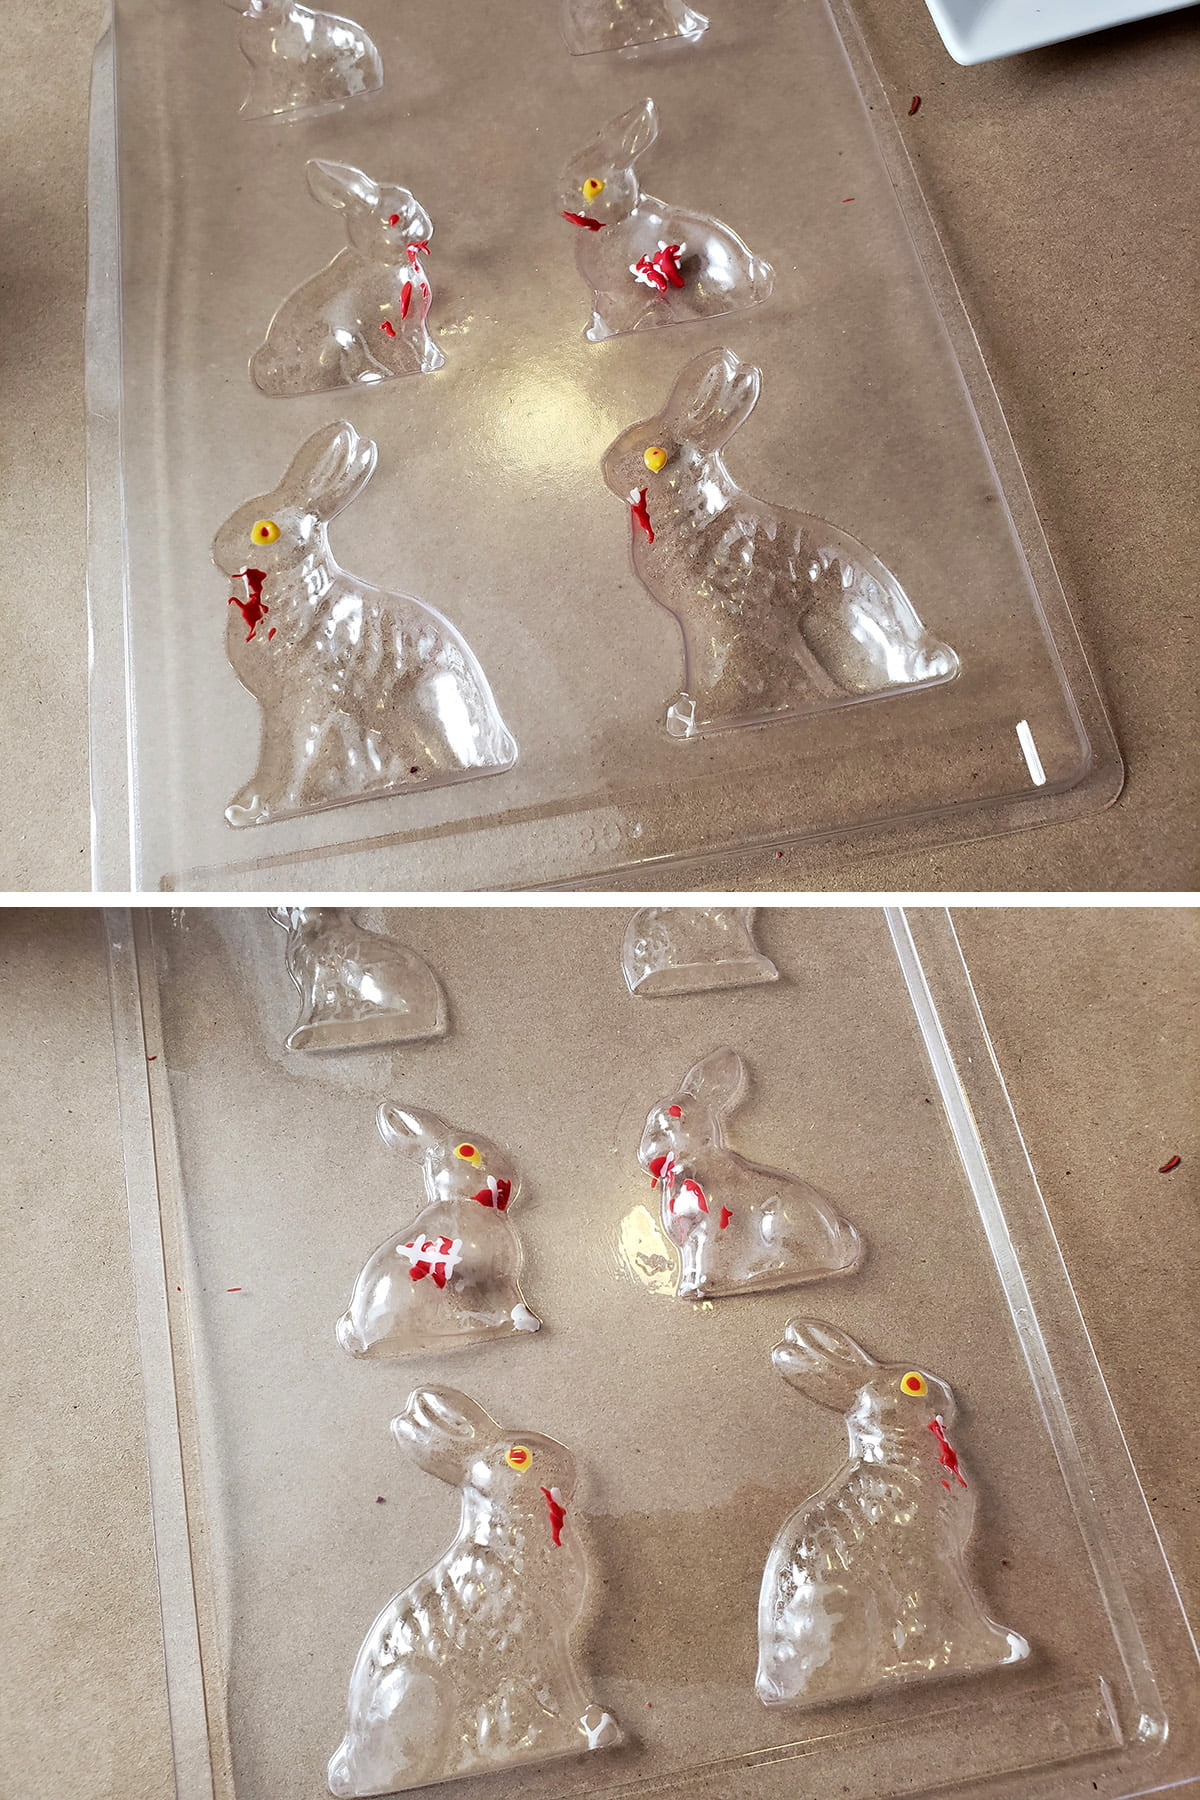 A two part compilation image shows both sides of a clear plastic bunny mold with some minor details filled in.